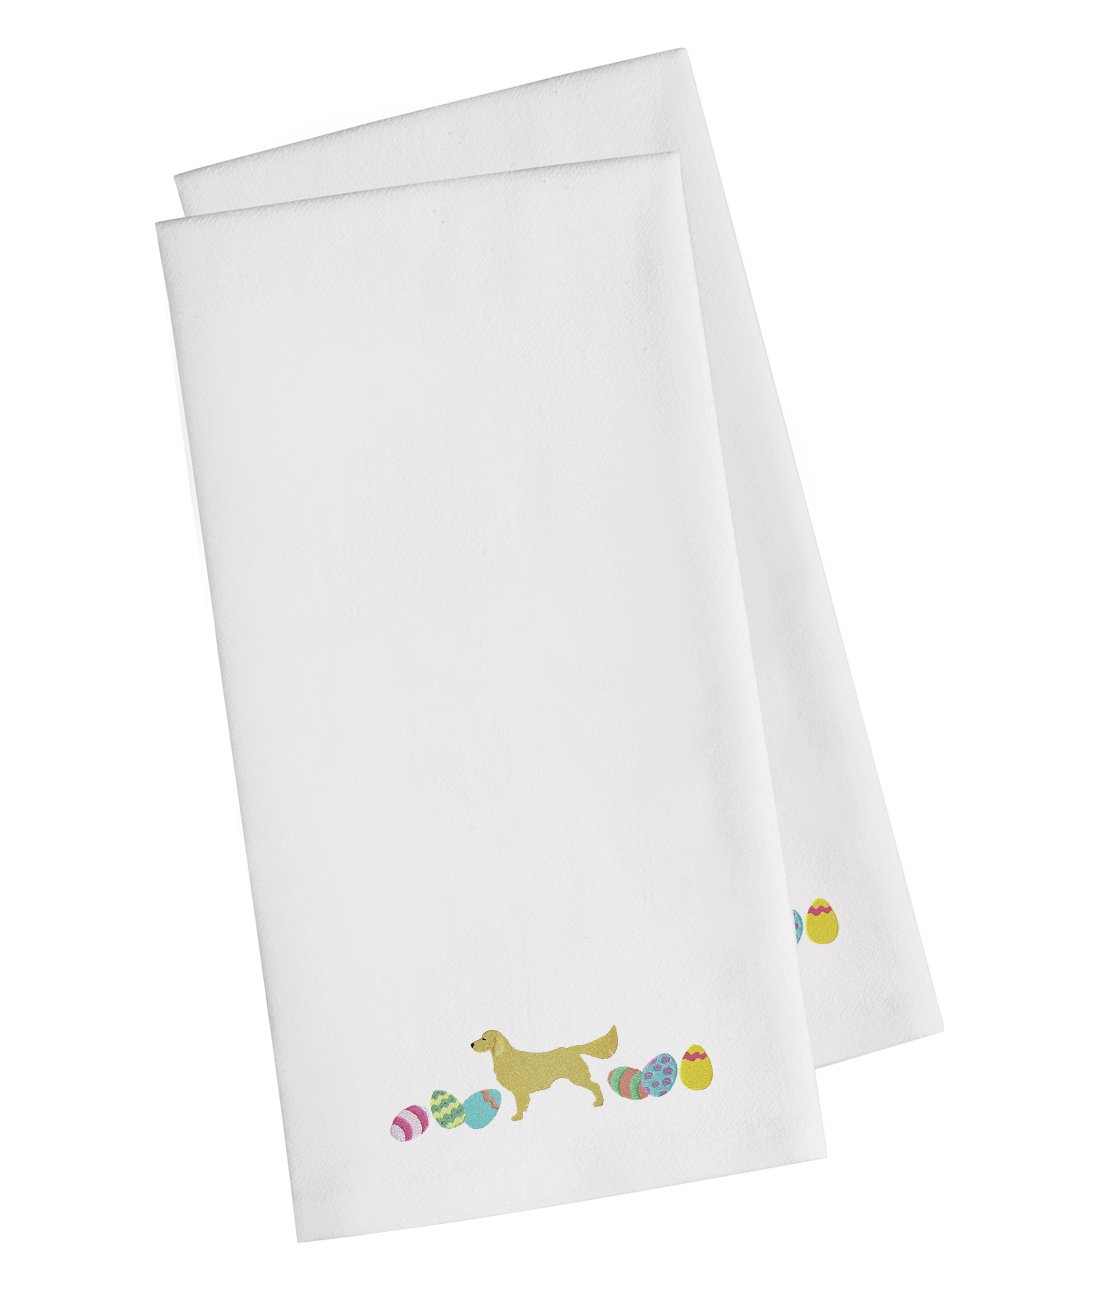 Golden Retriever Easter White Embroidered Kitchen Towel Set of 2 CK1647WHTWE by Caroline's Treasures